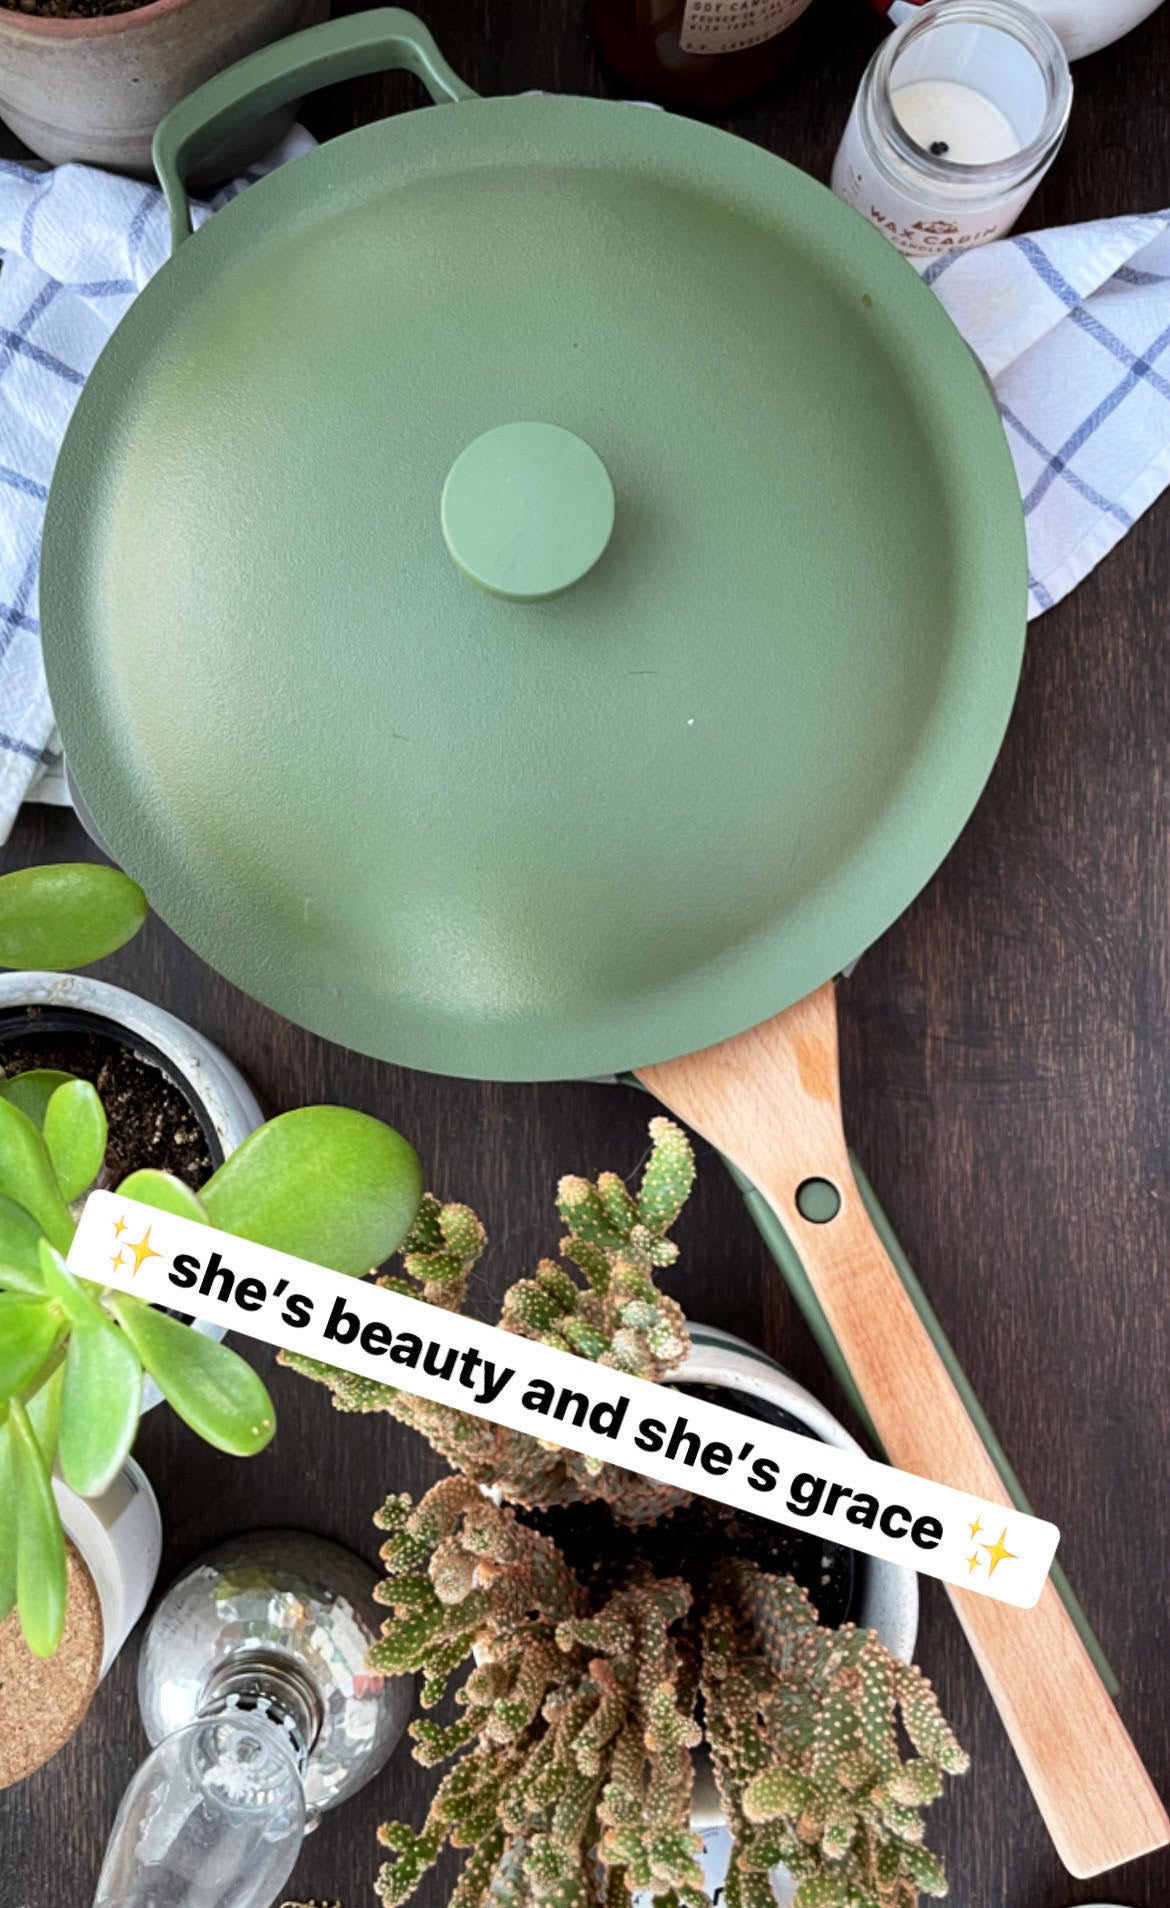 The pan on a window sill surrounded by plants and candles